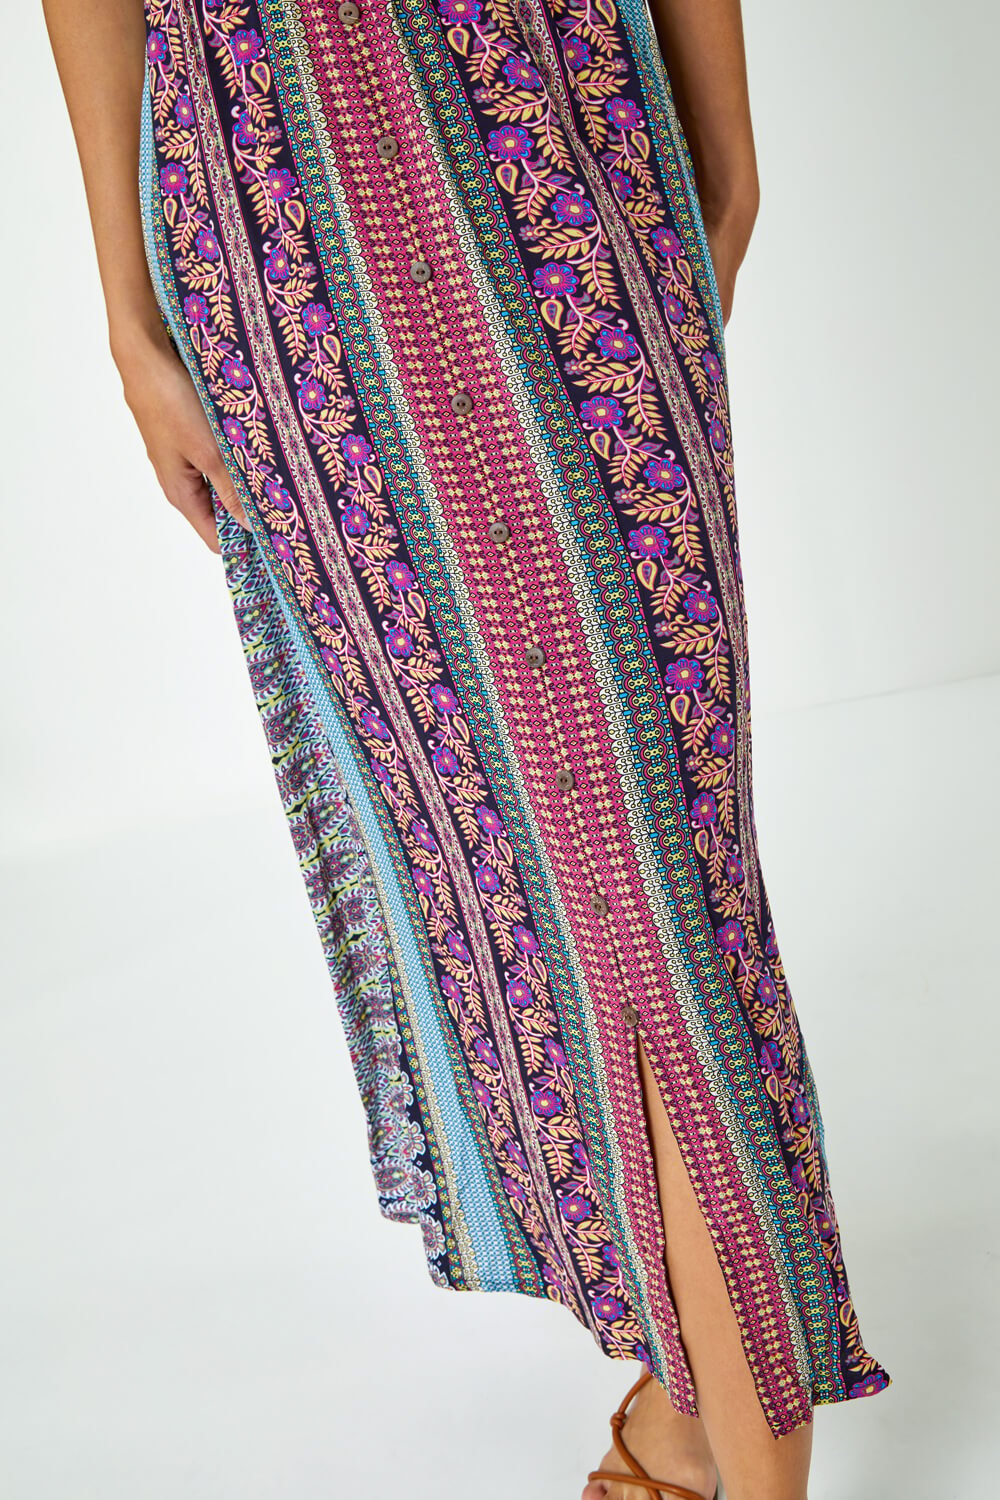 Purple Floral Print Fit and Flare Maxi Dress, Image 5 of 5